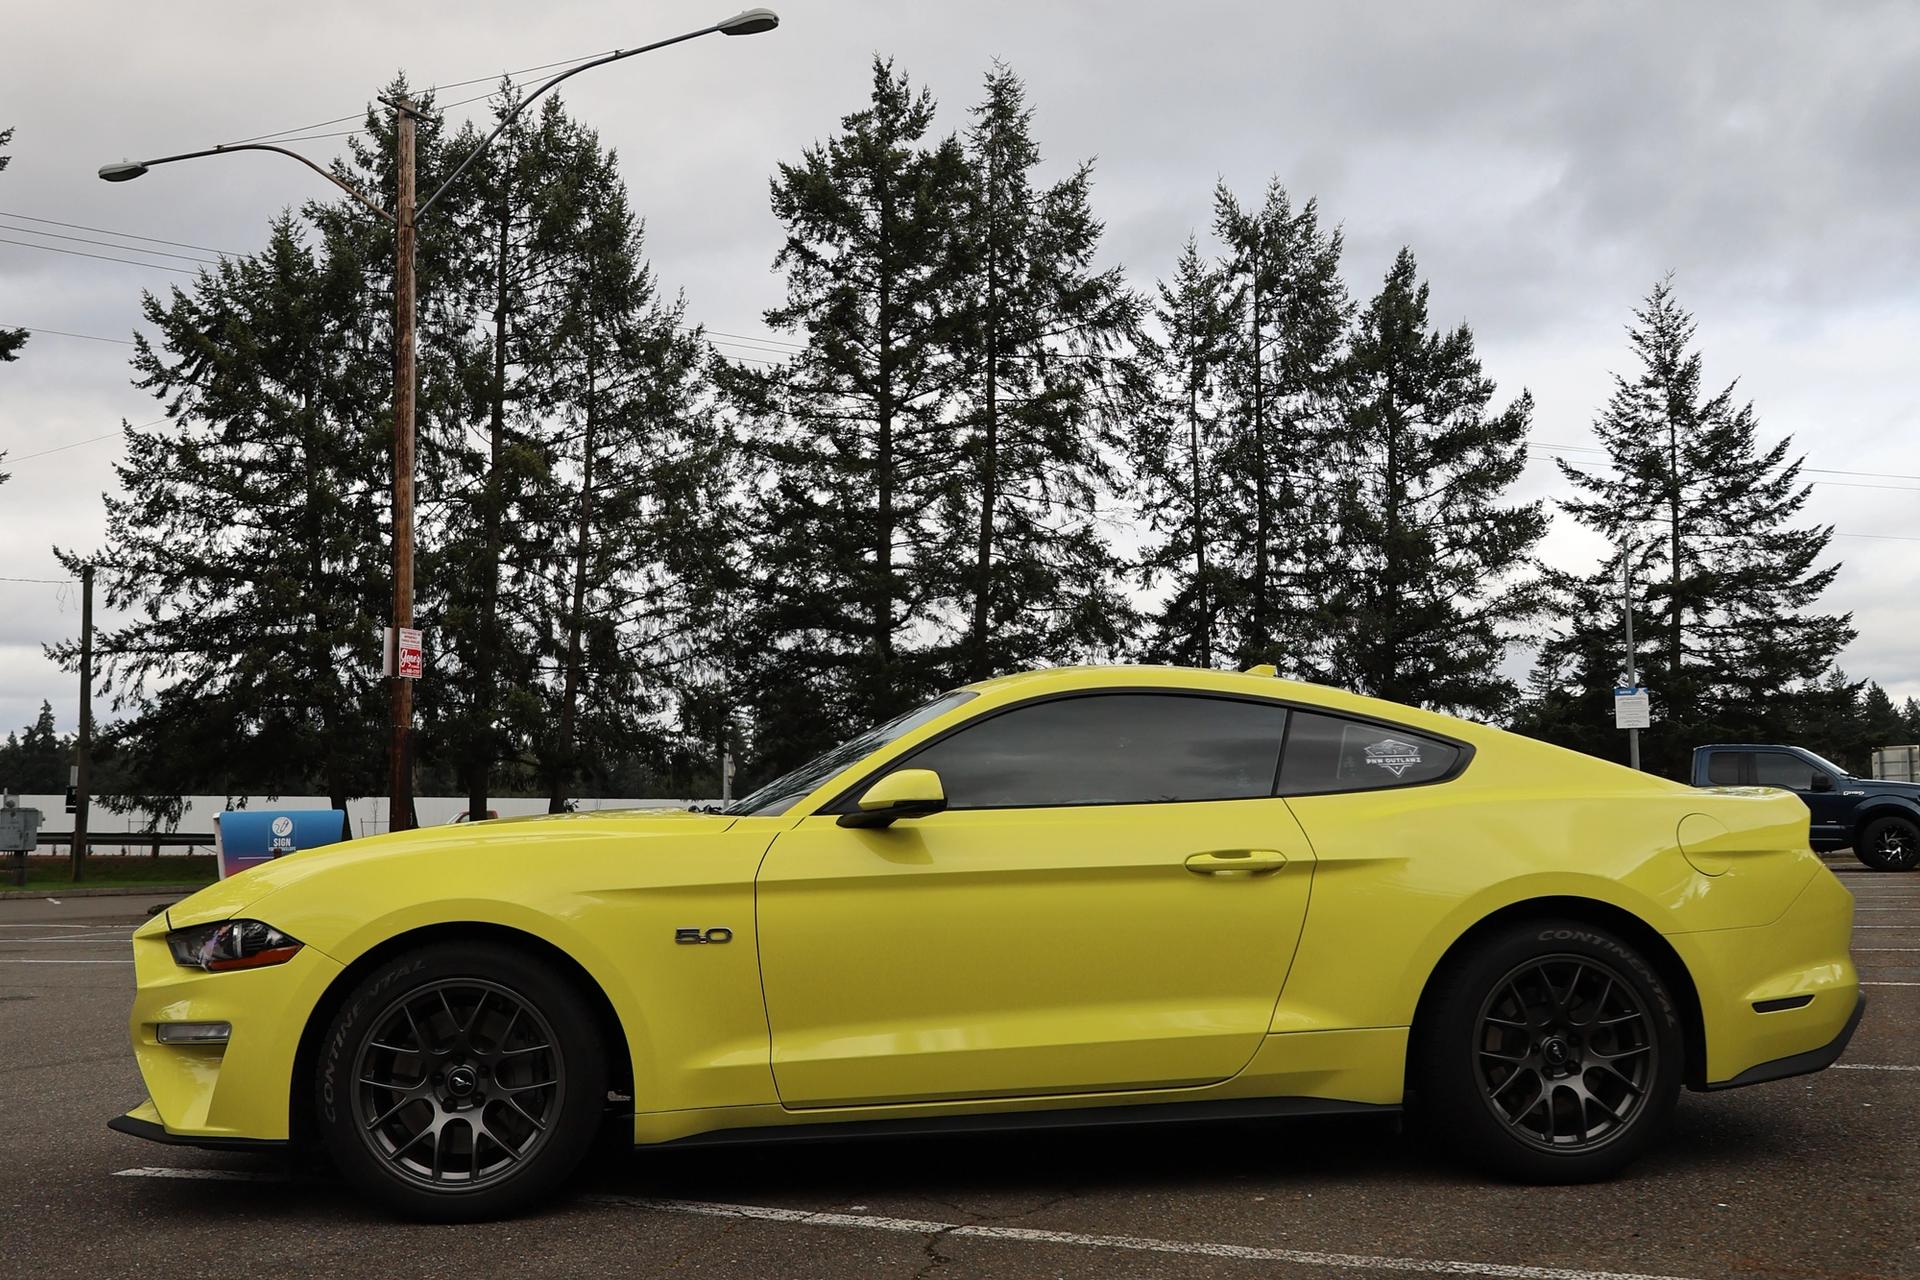 Ford S550 Mustang GT with 18" EC-7 in Anthracite